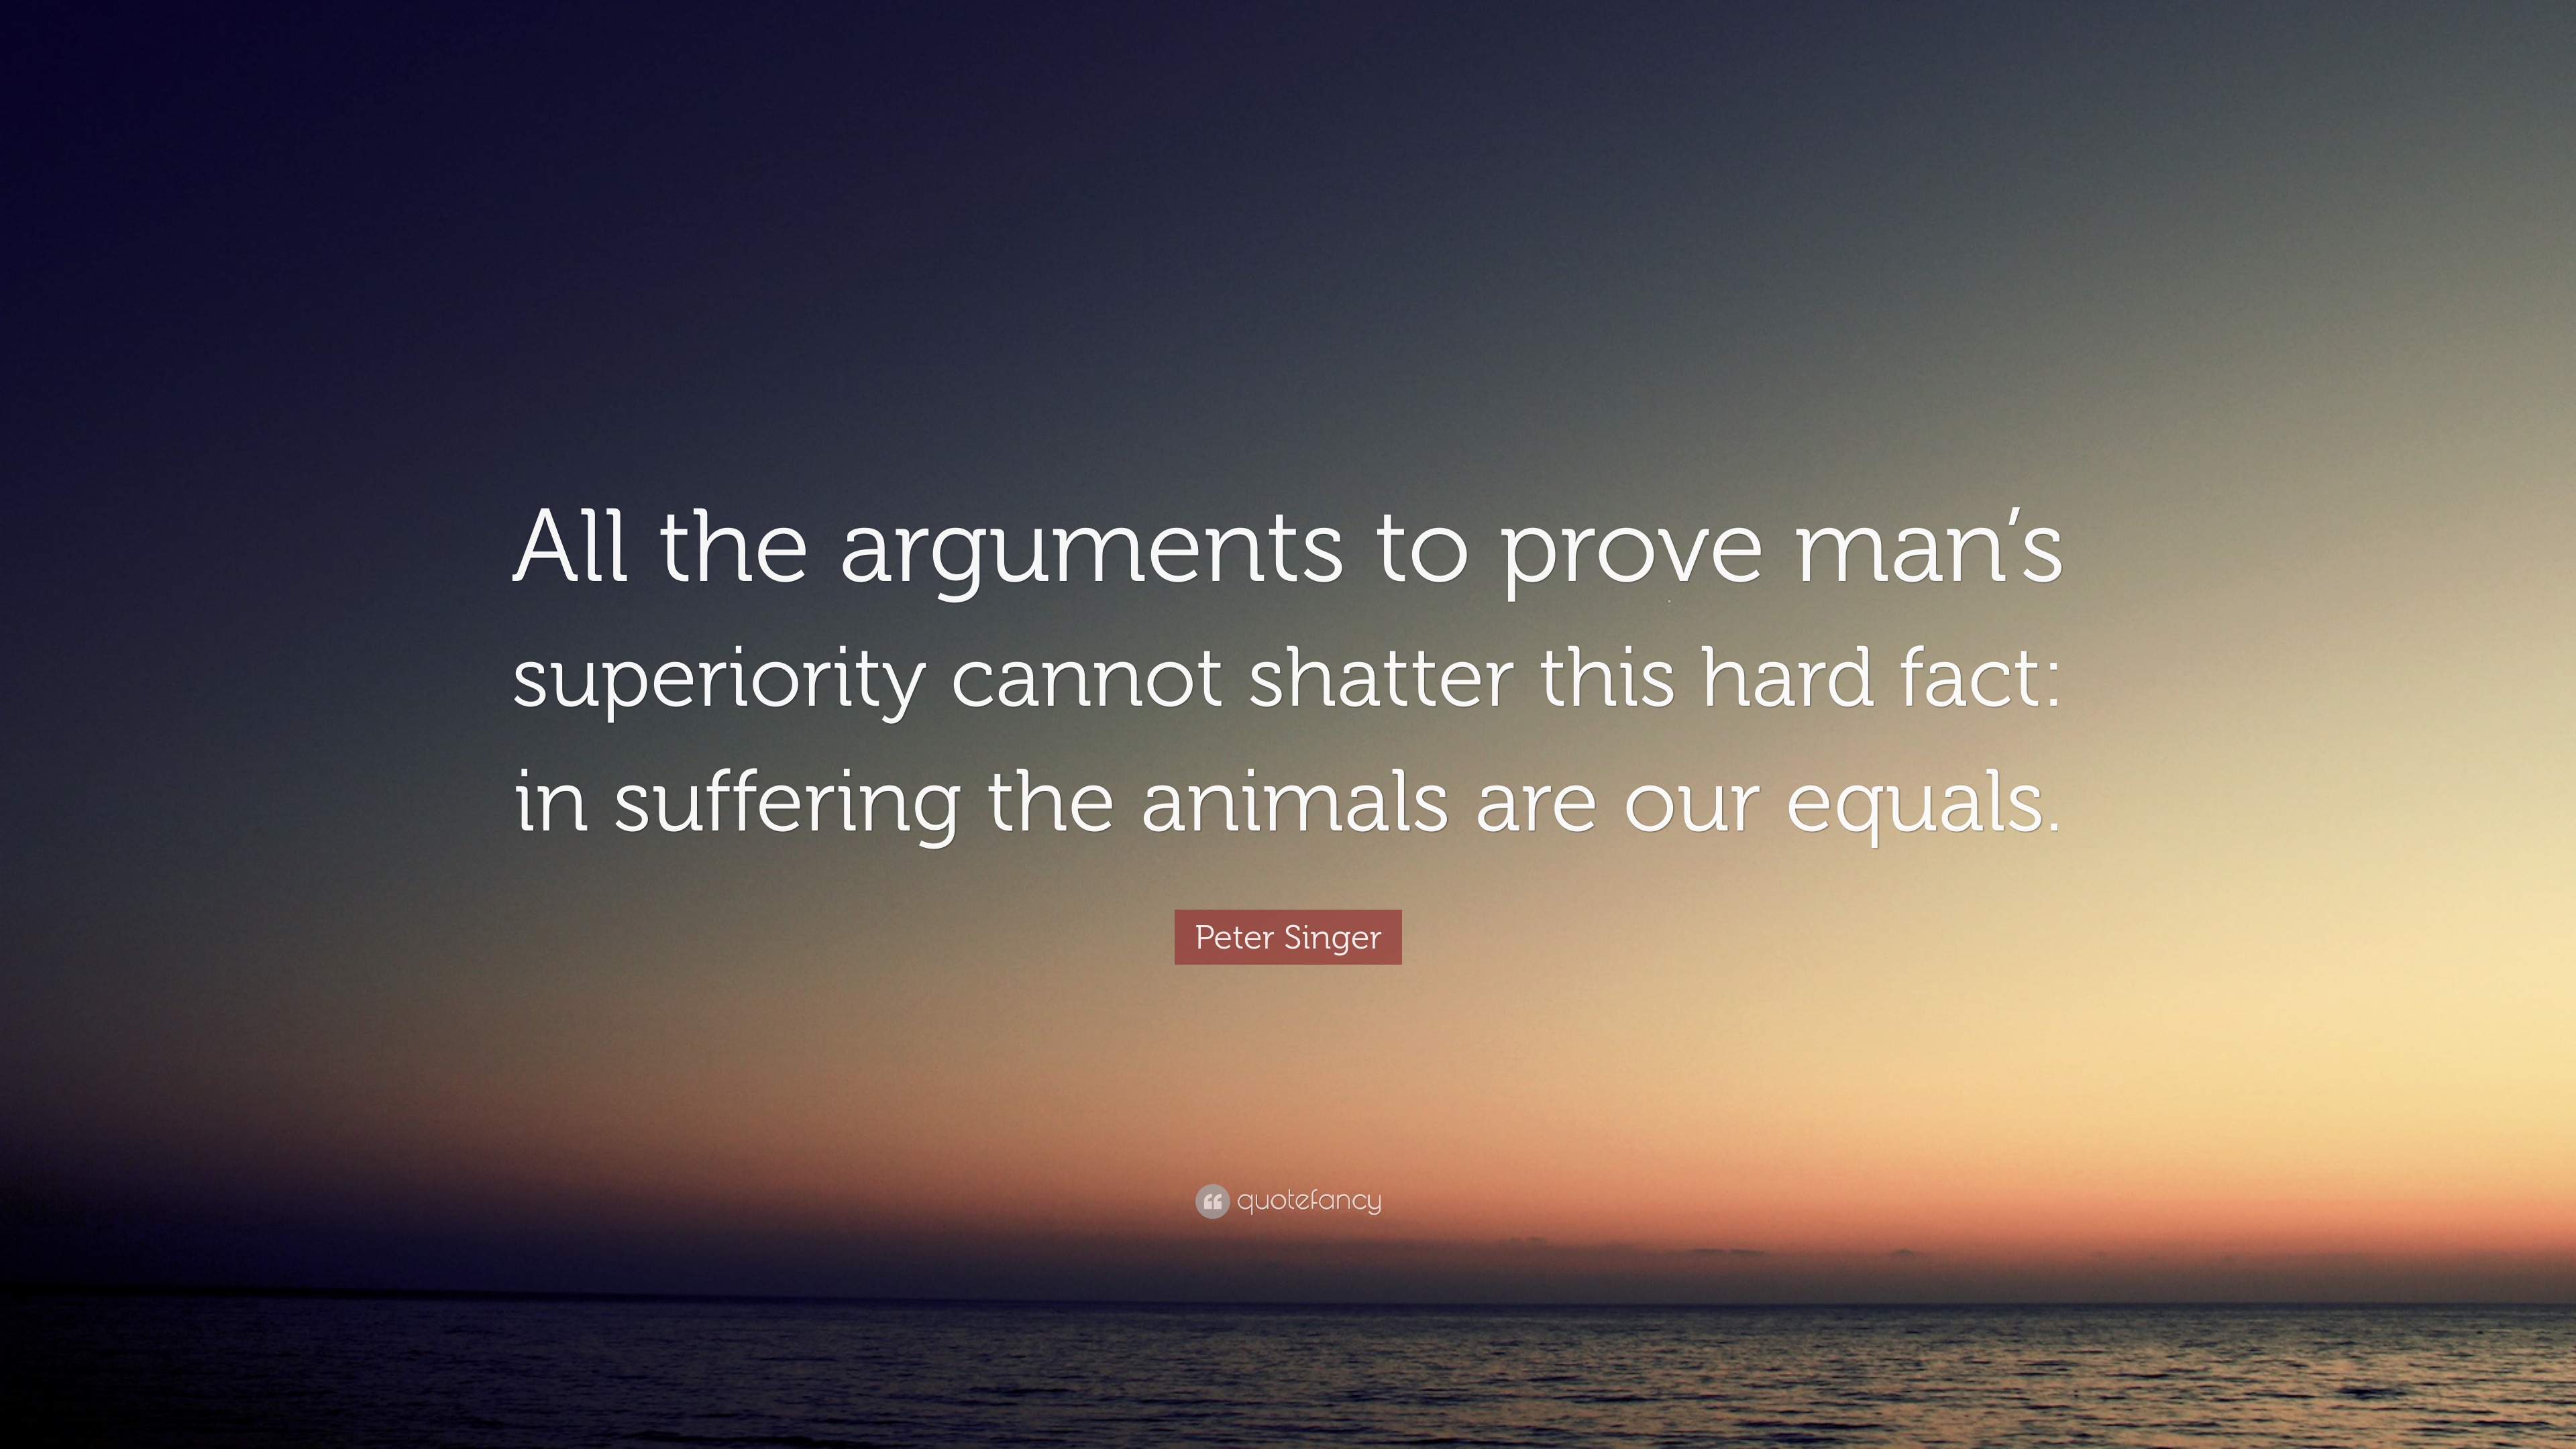 Peter Singer Quote: “All the arguments to prove man’s superiority